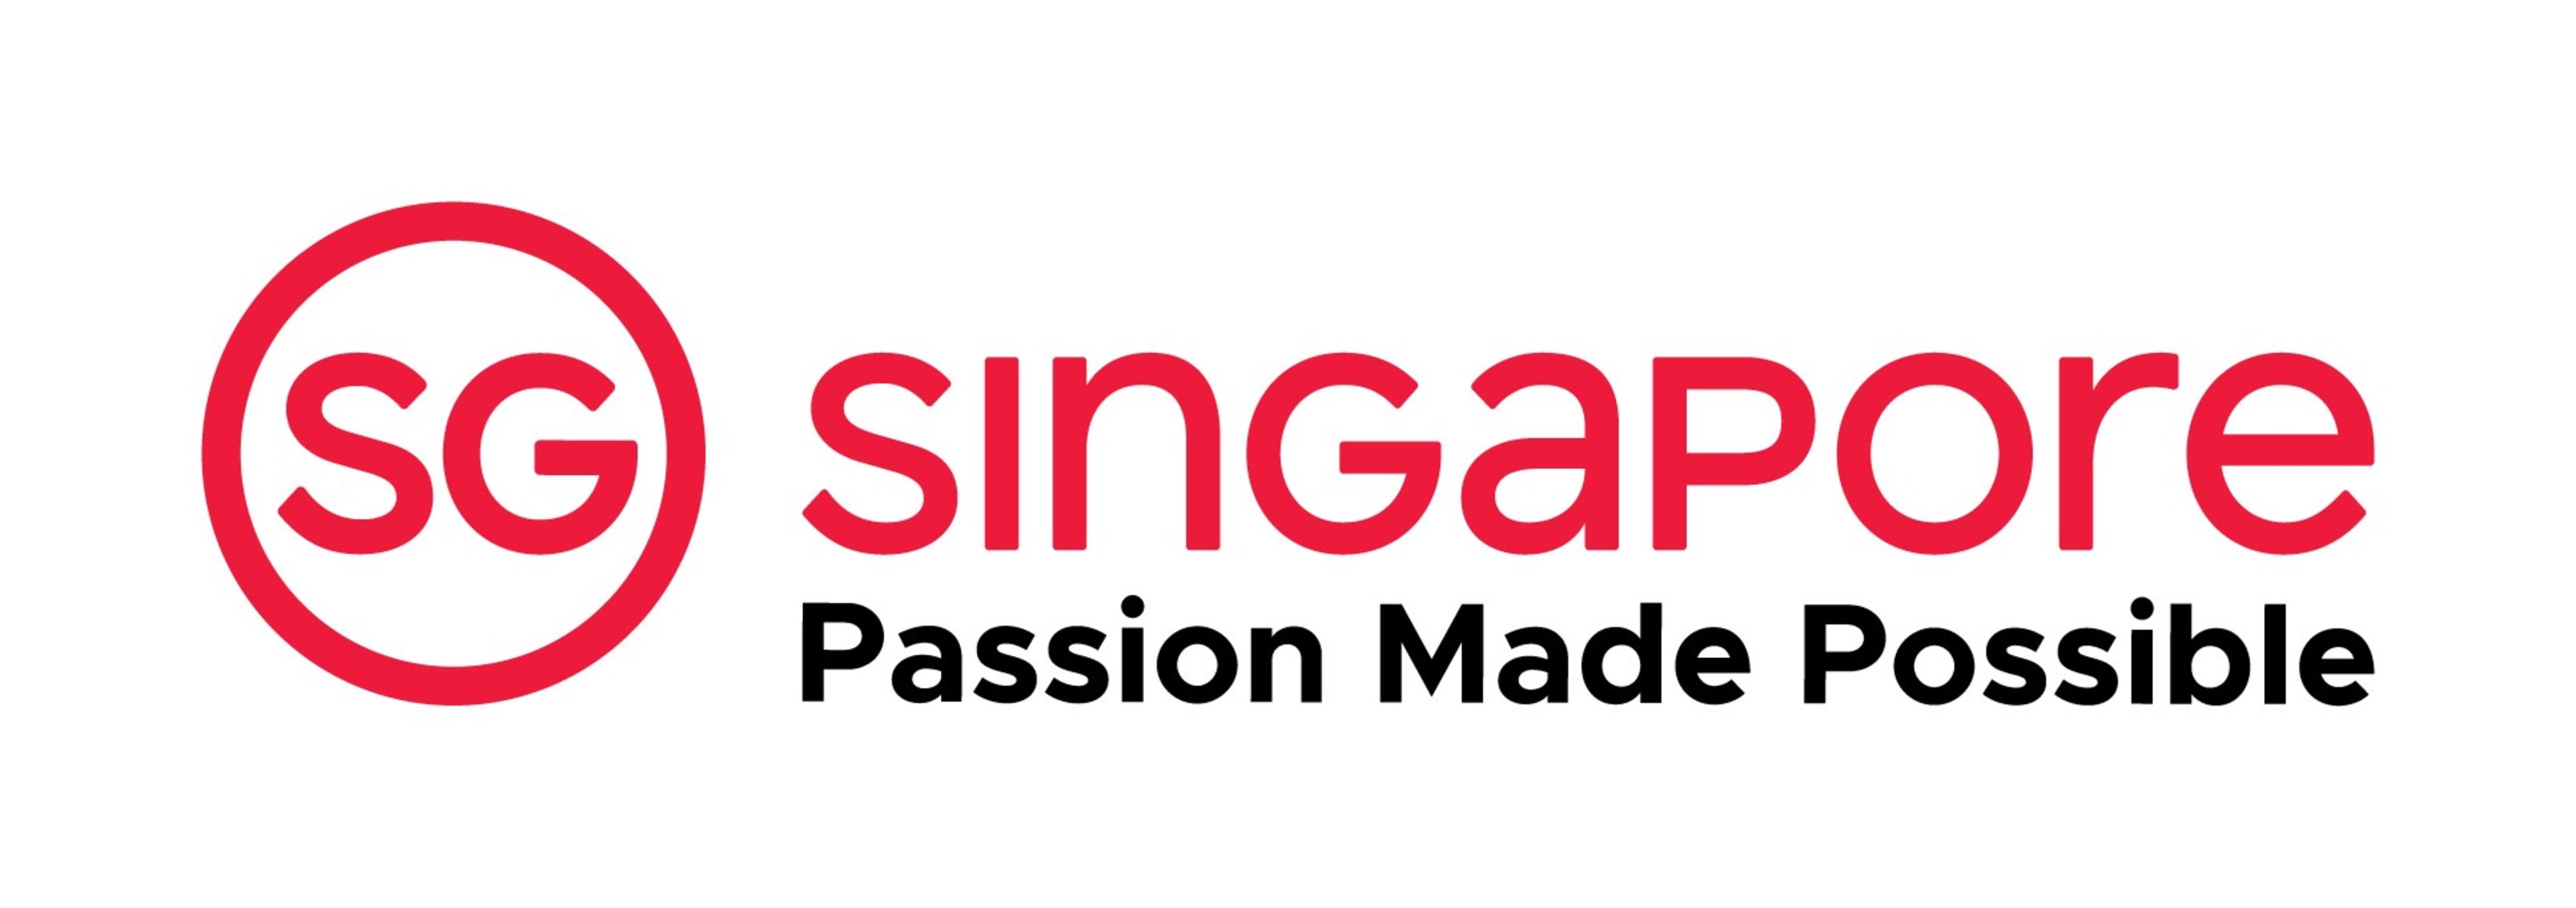 tourism board of singapore